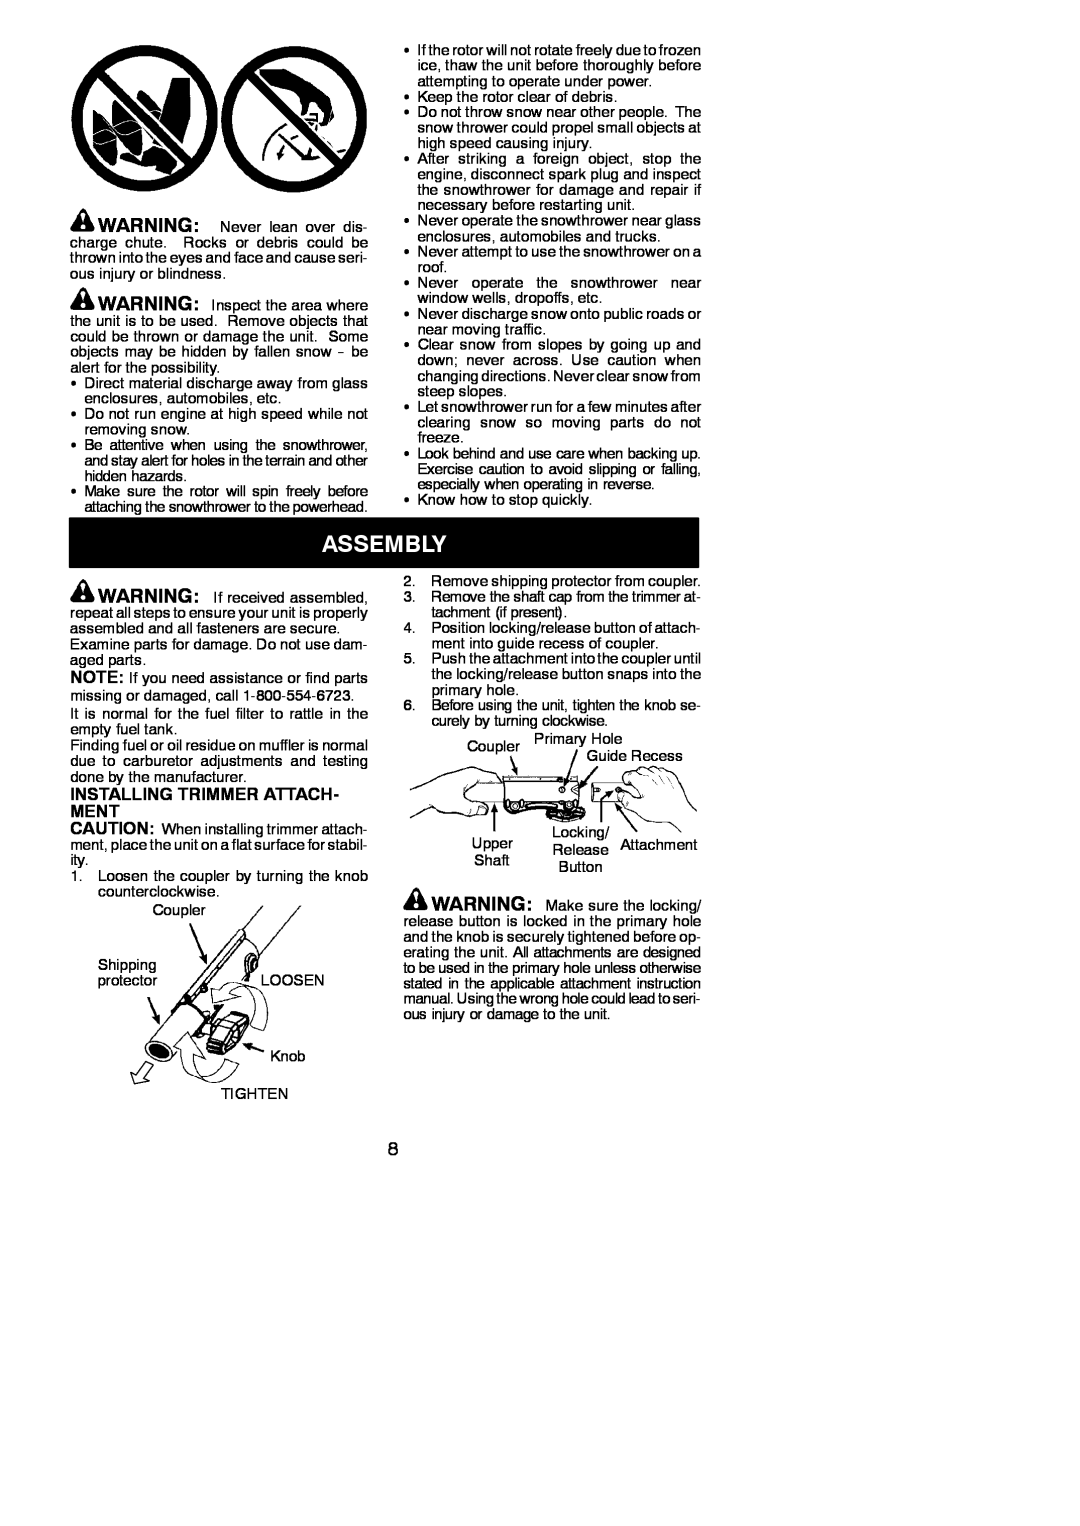 Poulan 952711879 instruction manual Assembly, Installing Trimmer Attach- Ment 